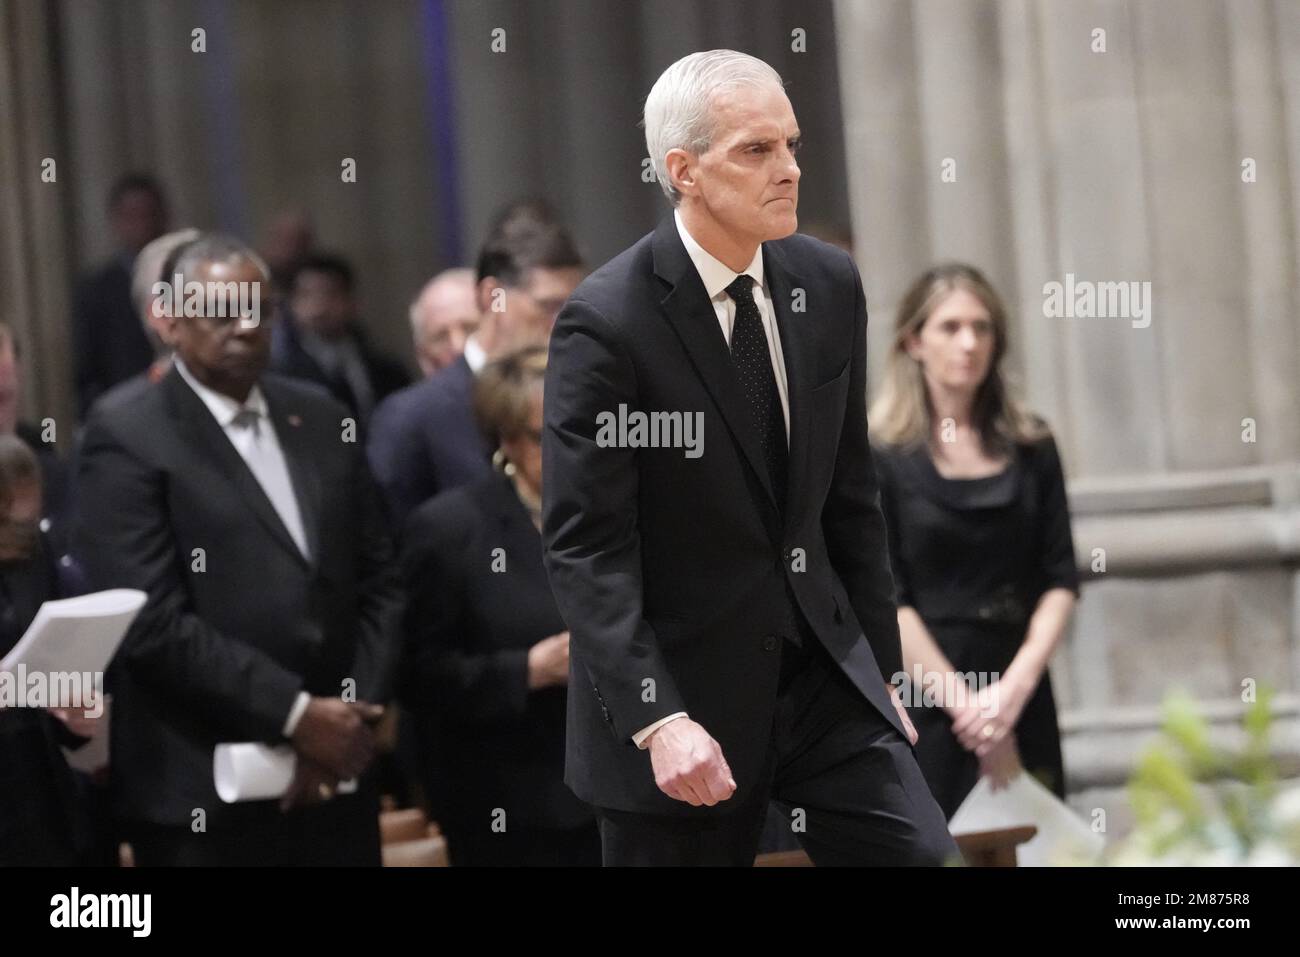 United States Secretary of Veterans Affairs Denis McDonough rises to deliver remarks a memorial service for former US Secretary of Defense Ash Carter in the Washington National Cathedral in Washington, DC on Thursday, January 12, 2023. Credit: Chris Kleponis / Pool via CNP Stock Photo